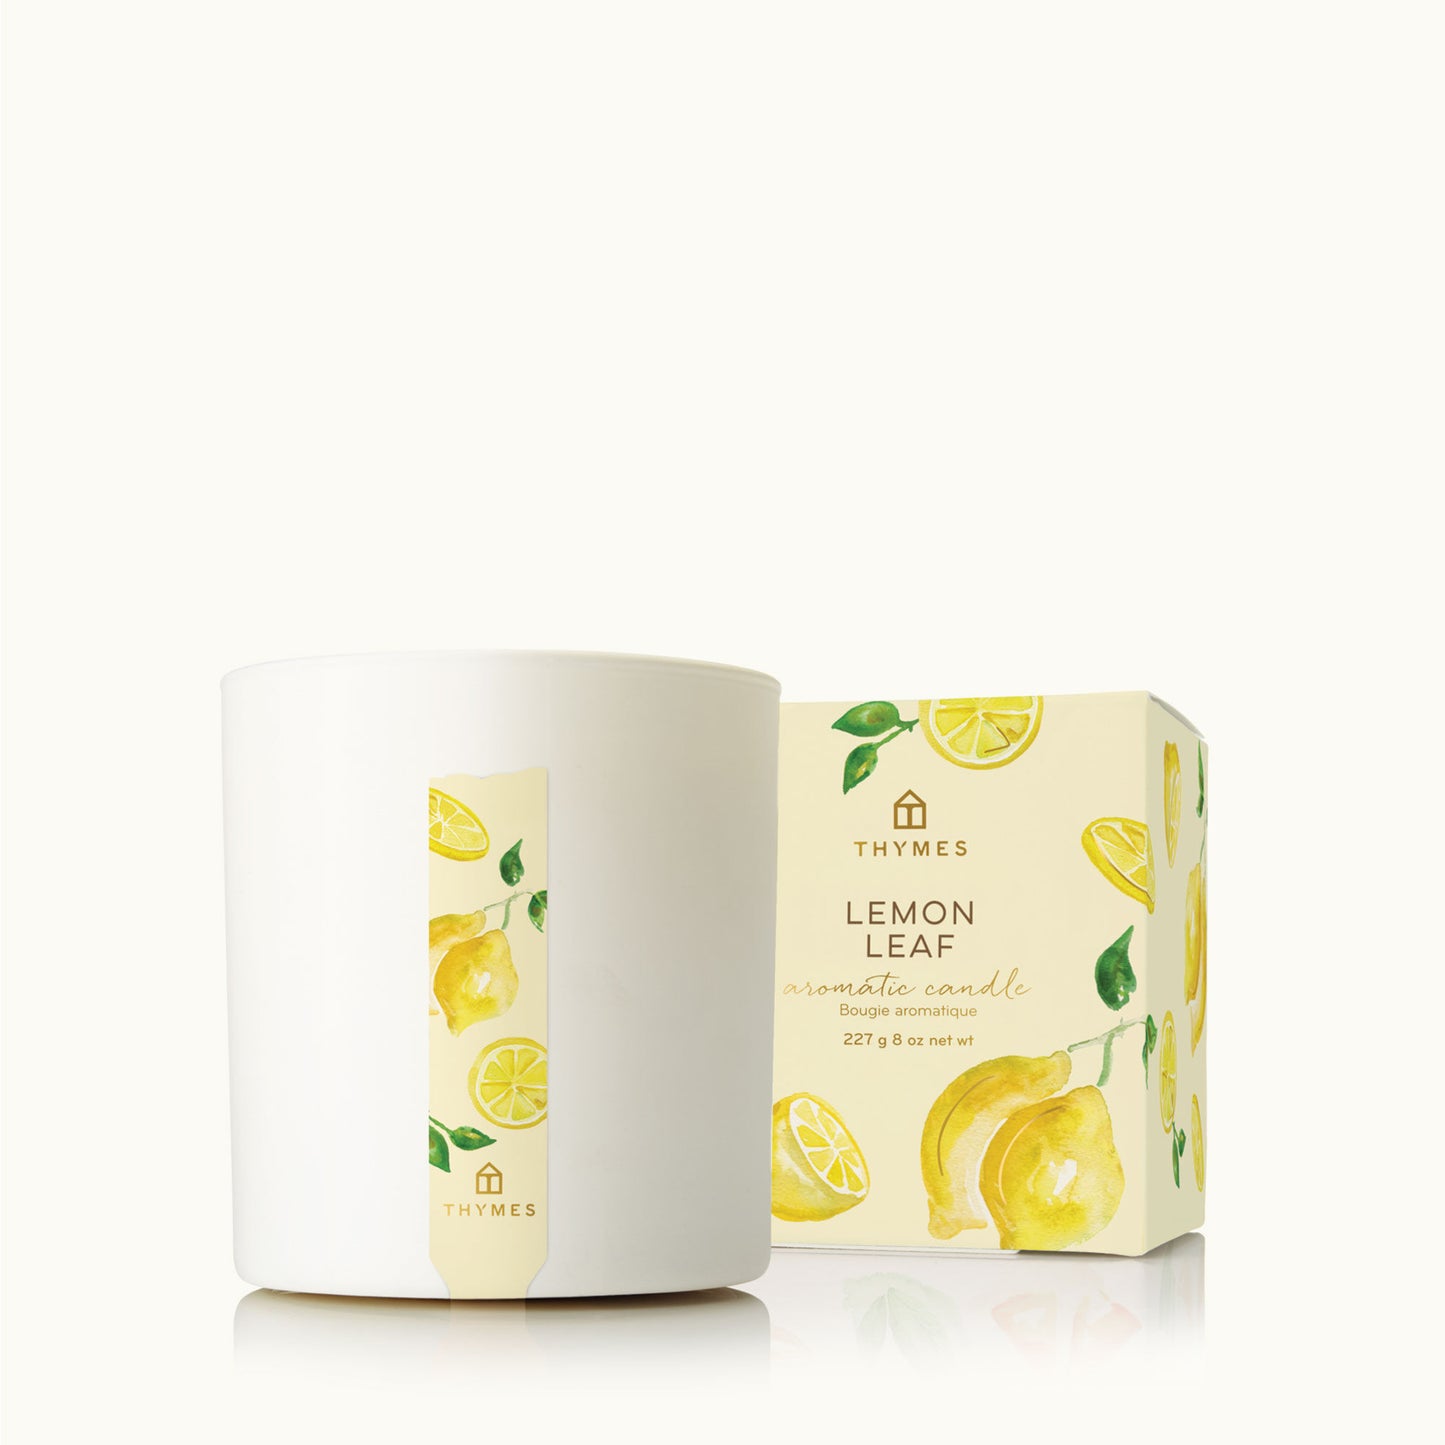 Thymes Lemon Leaf Aromatic Candle